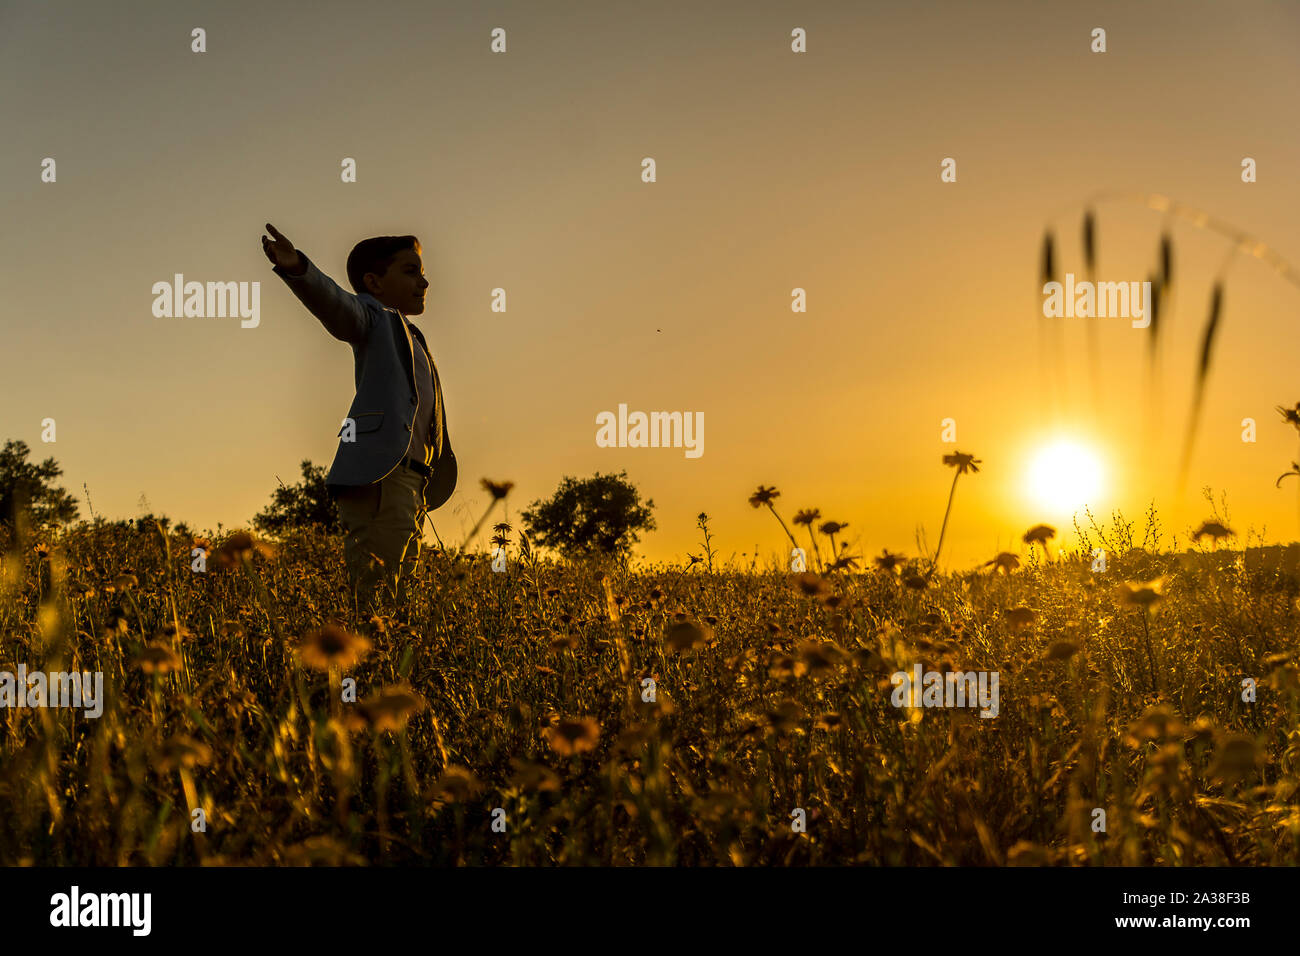 Boy standing in a field at sunset with arms outstretched, Spain Stock Photo